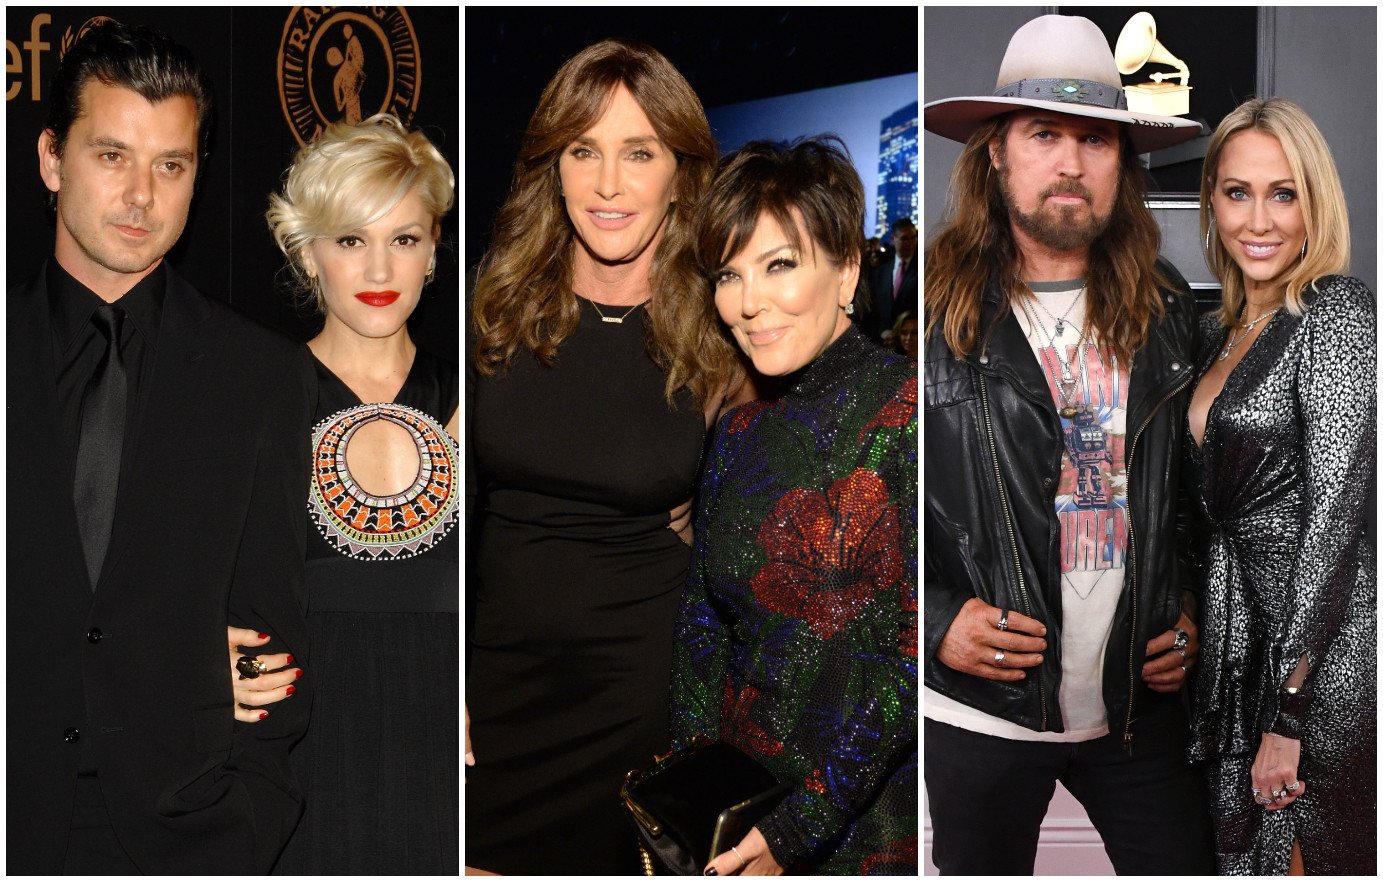 Gavin Rossdale and Gwen Stefani, Kris Jenner and Caitlyn Jenner, Tish Cyrus and Billy Ray Cyrus … Showbiz isn’t always glamorous, especially in the case of divorce. Photos: AP; Wire Image; Getty Images